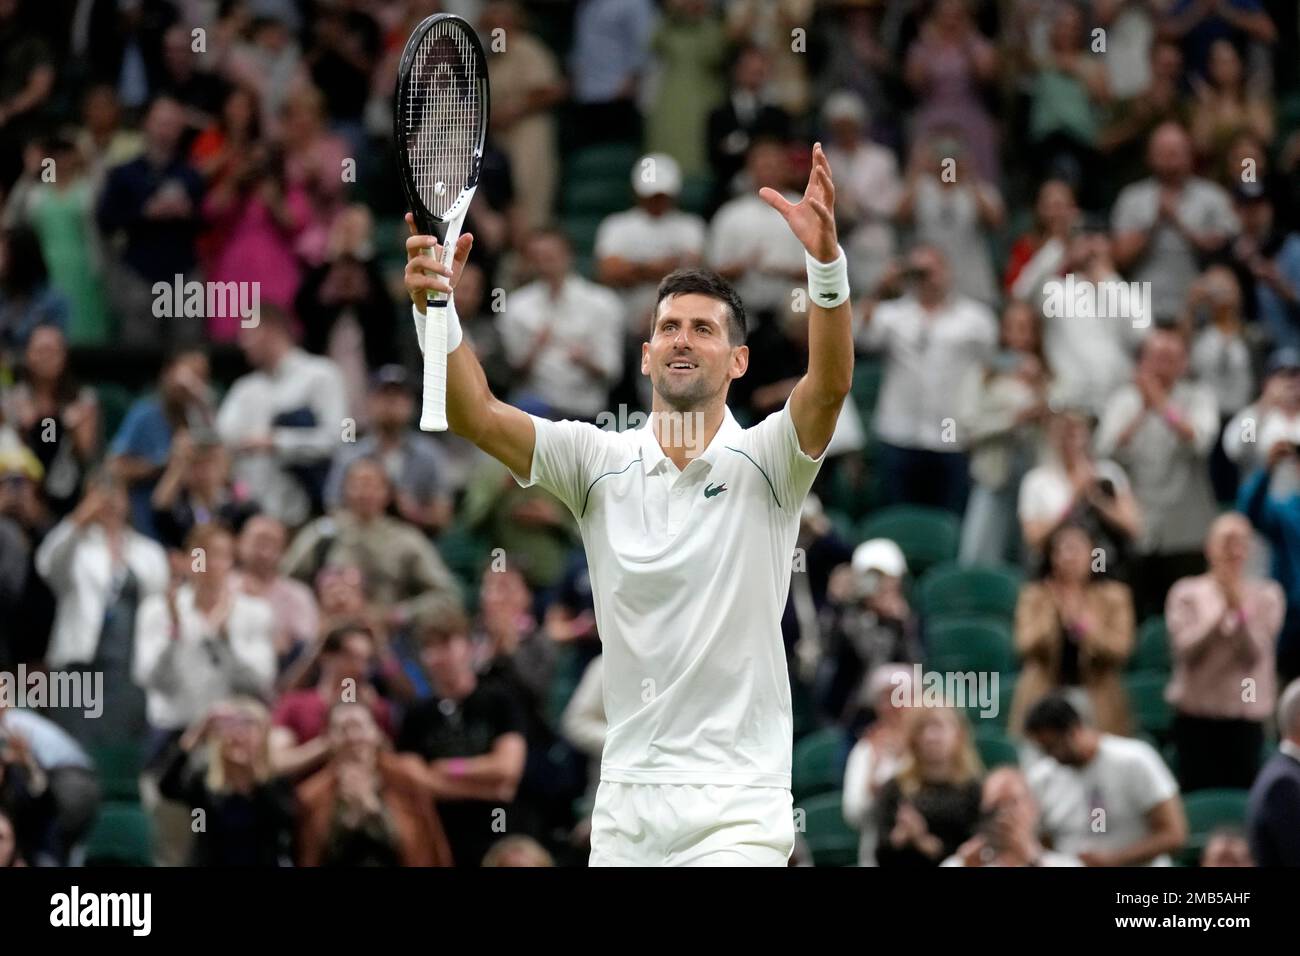 Serbias Novak Djokovic celebrates defeating Tim van Rijthoven of the Netherlands during a mens fourth round singles match on day seven of the Wimbledon tennis championships in London, Sunday, July 3, 2022.(AP